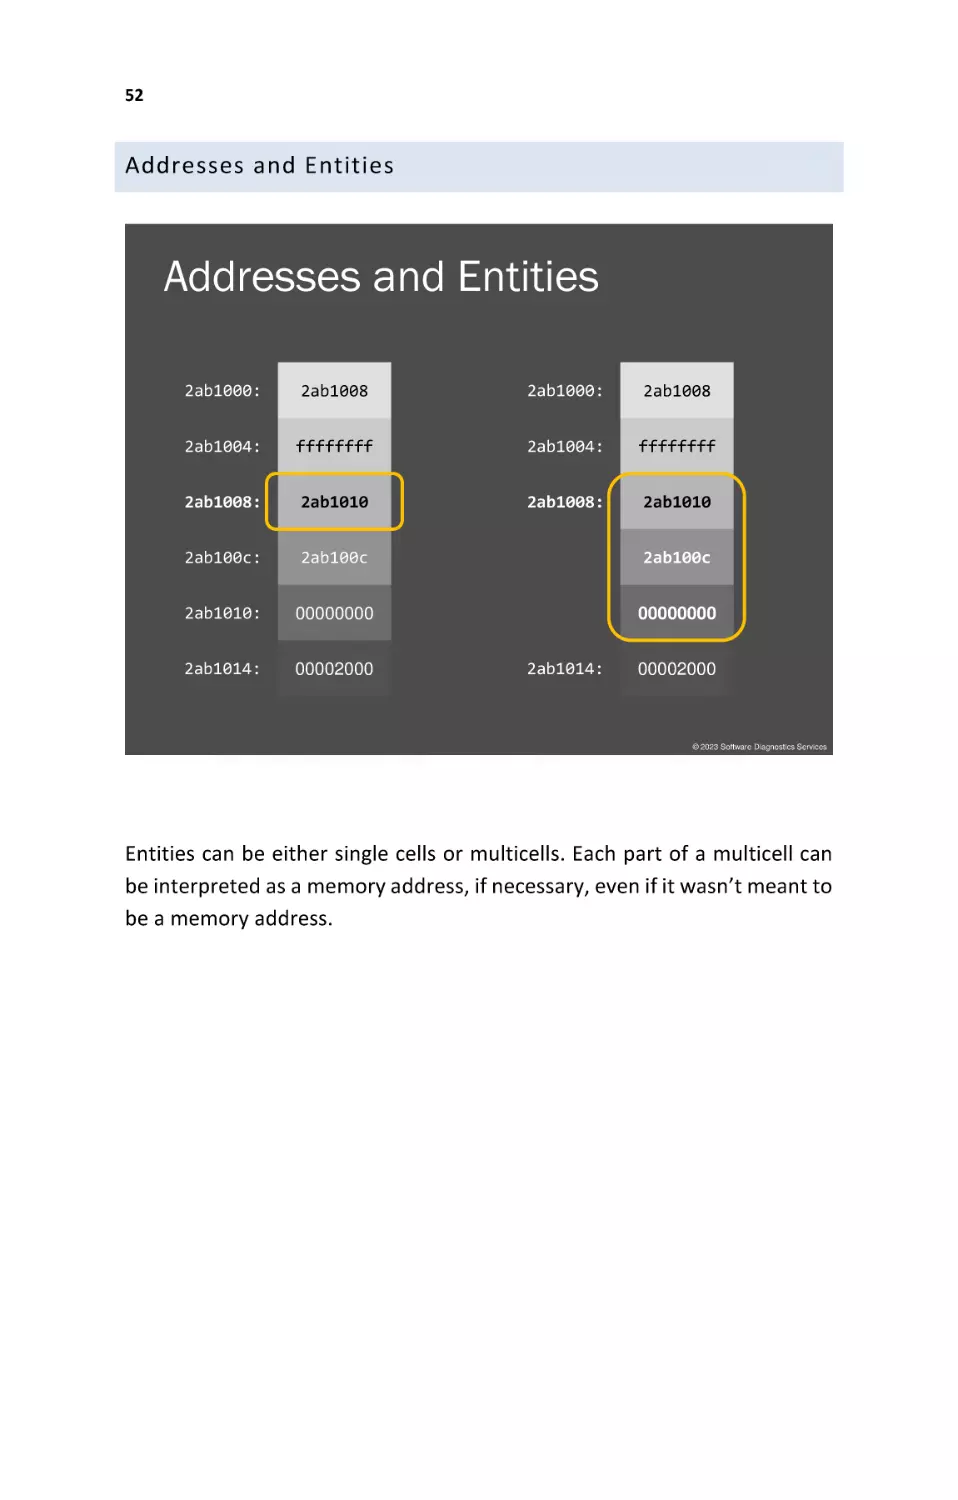 Addresses and Entities